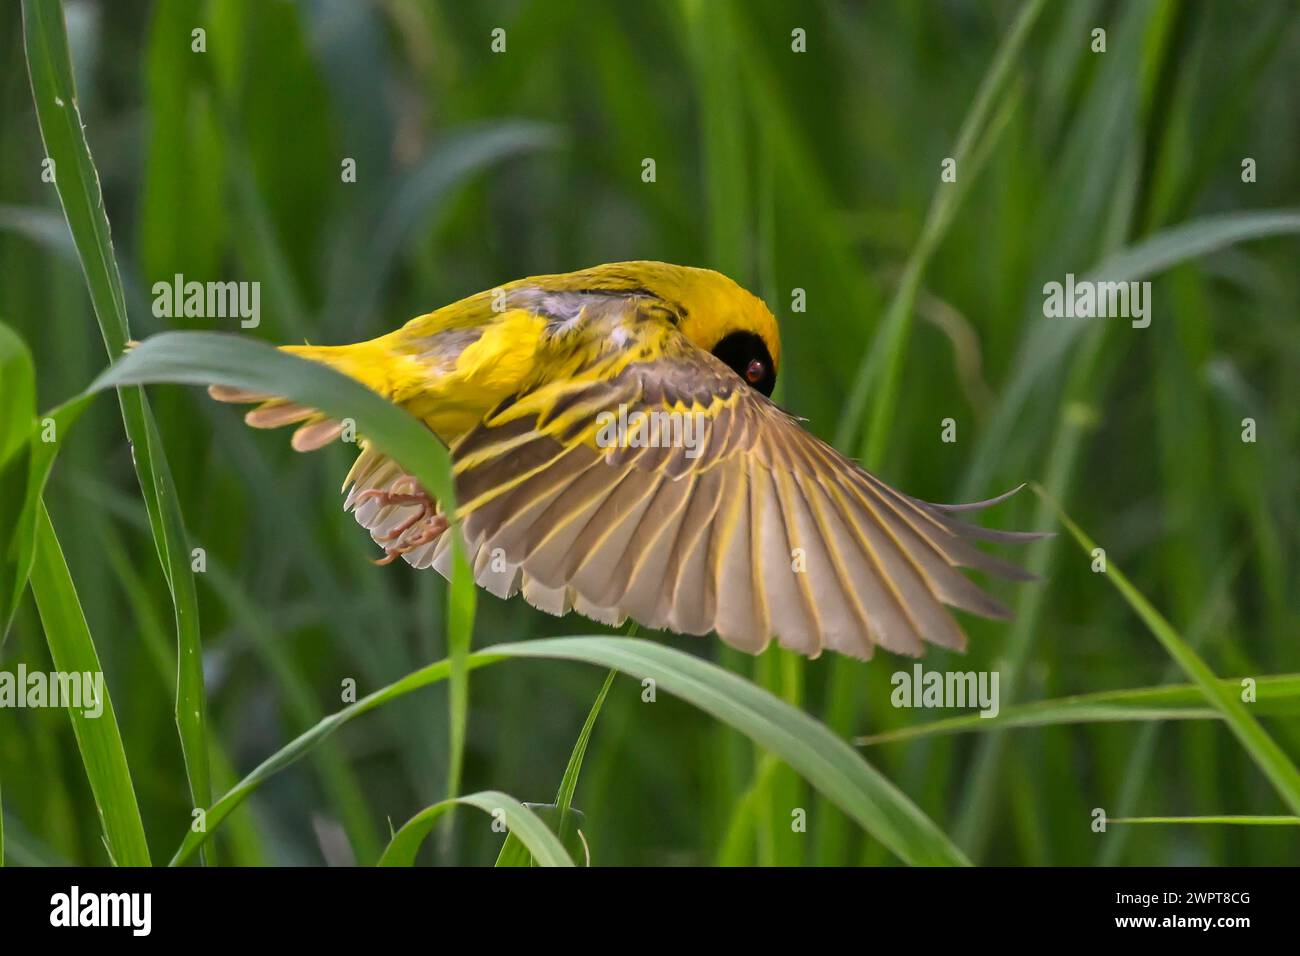 Southern masked weaver (Ploceus velatus) collecting nesting material, Madikwe Game Reserve, North West Province, South Africa, RSA Stock Photo